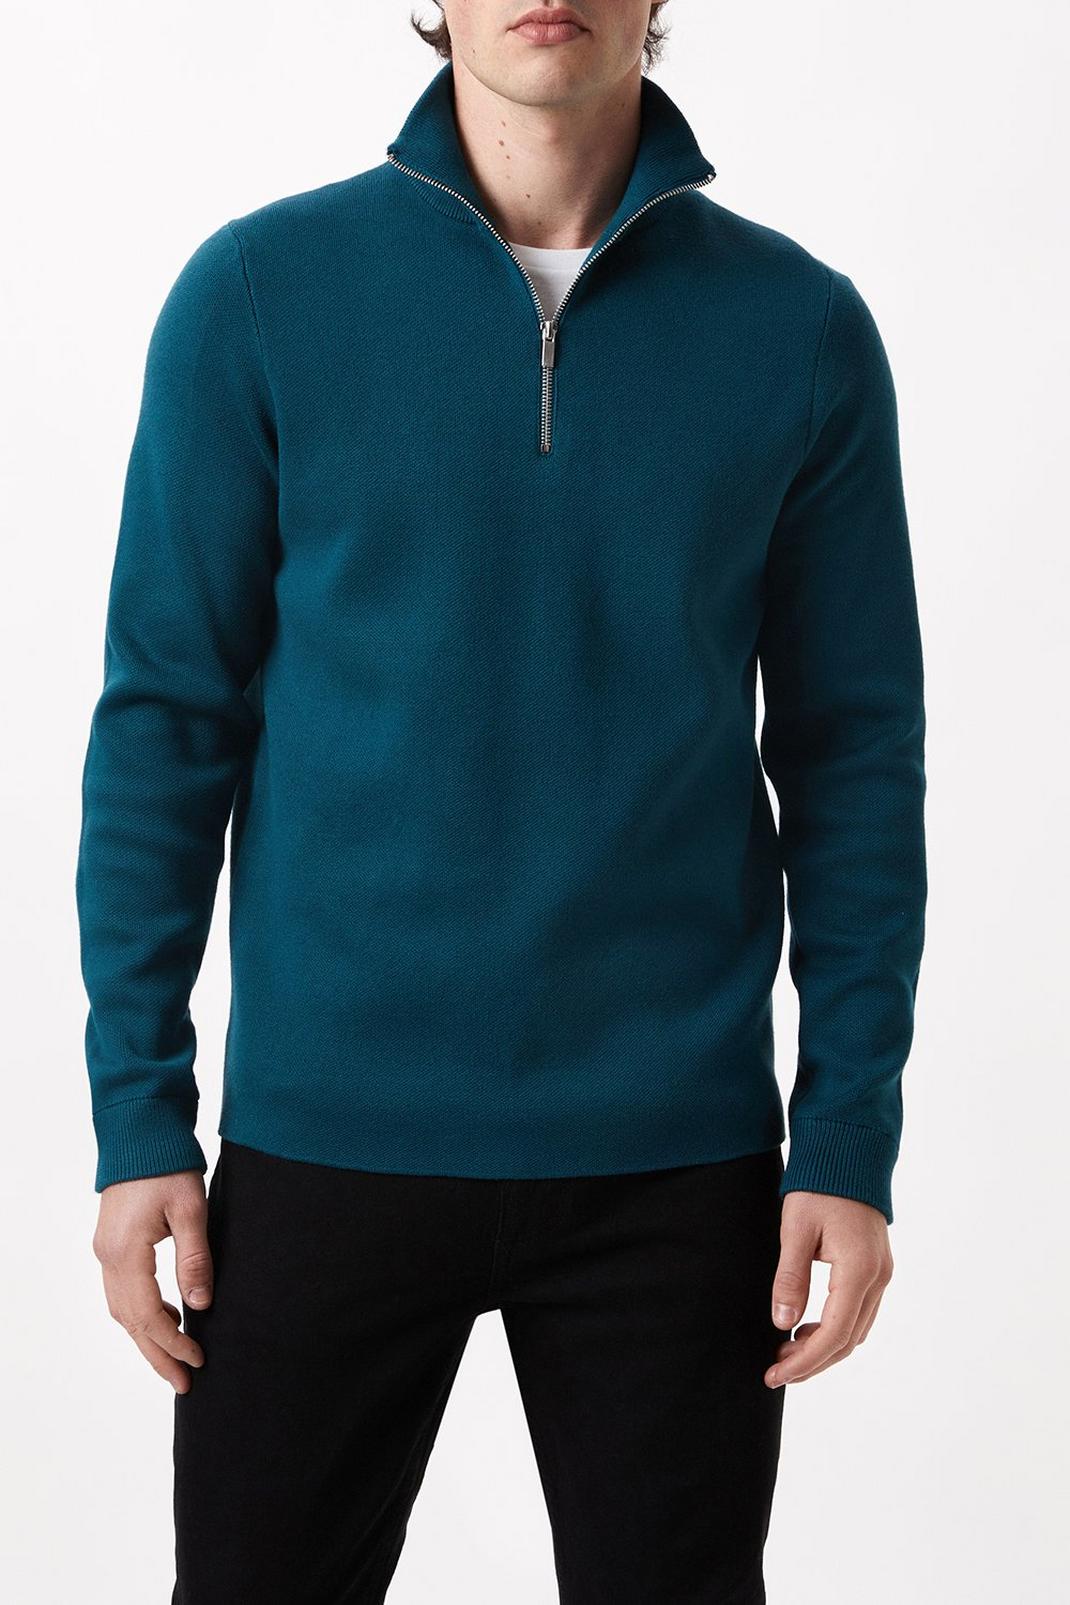 Premium Teal Knitted Zip Funnel Neck image number 1